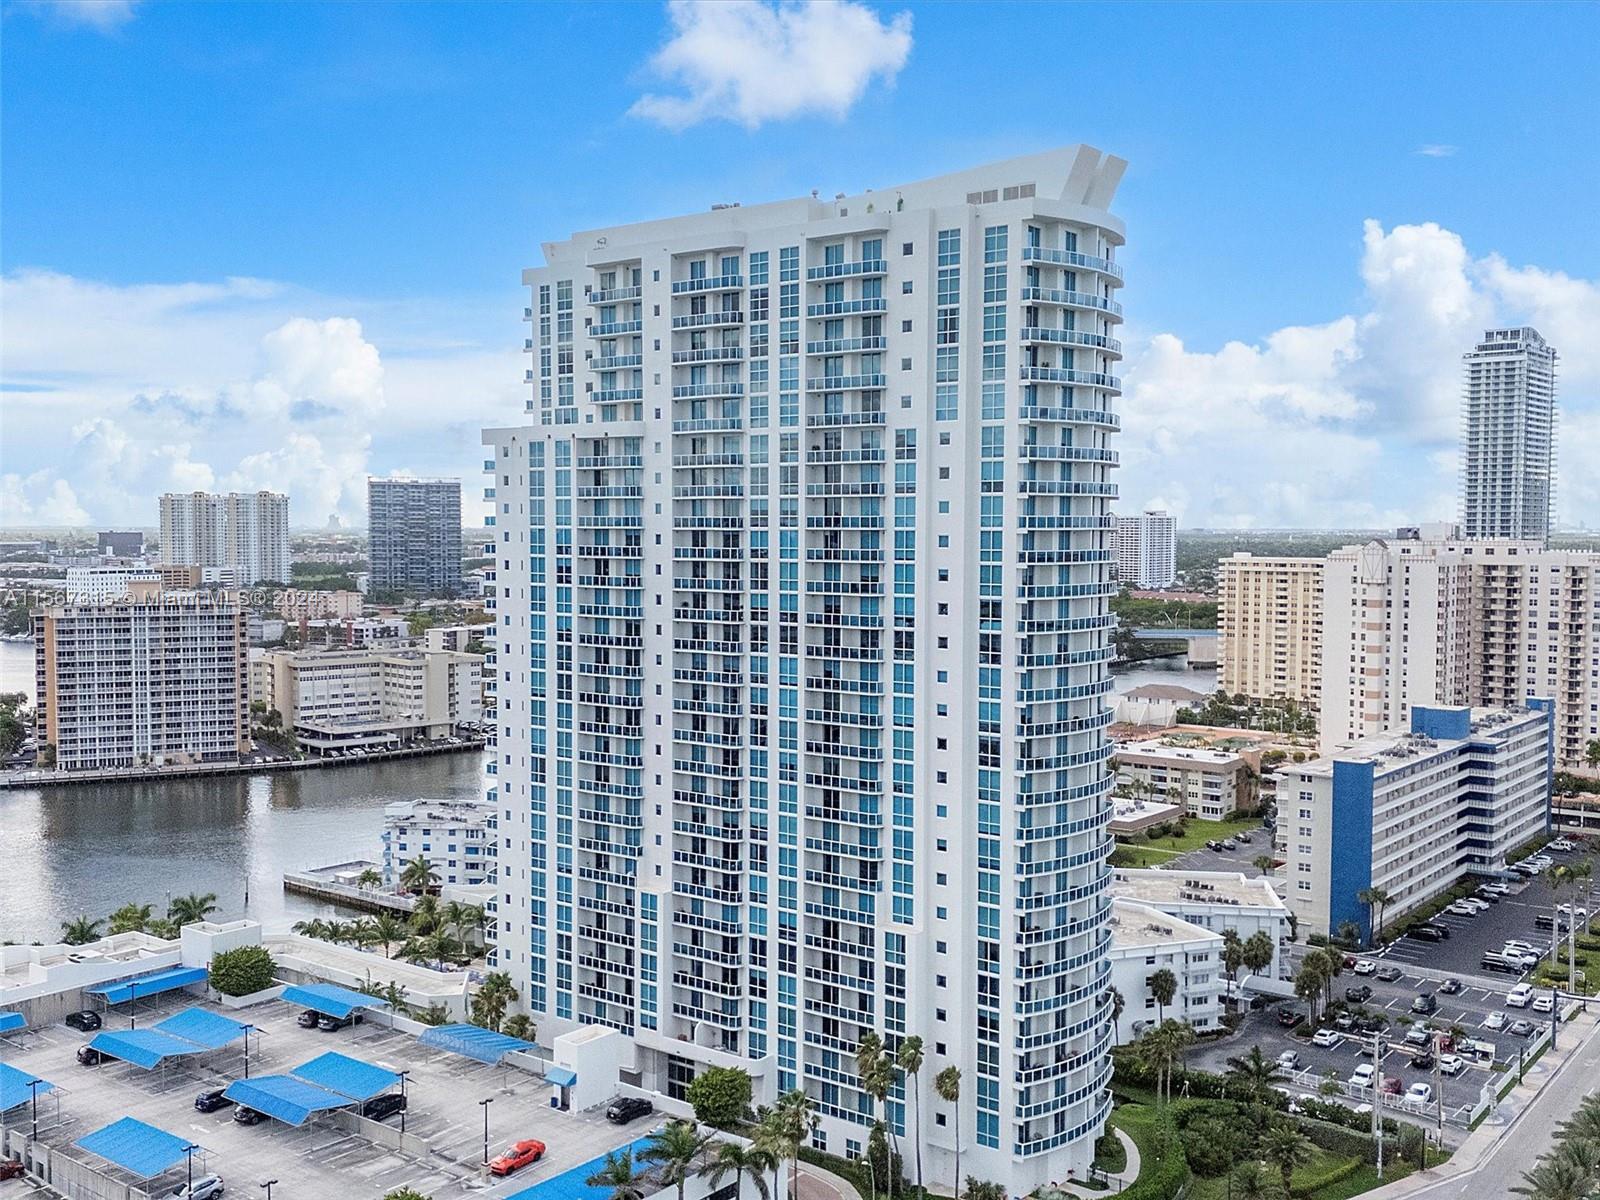 *LOWEST PRICED 2/2.5  IN THE BUILDING !! LUXURY BUILDING DIRECTLY ON THE HOLLYWOOD INTRACOASTAL WATE